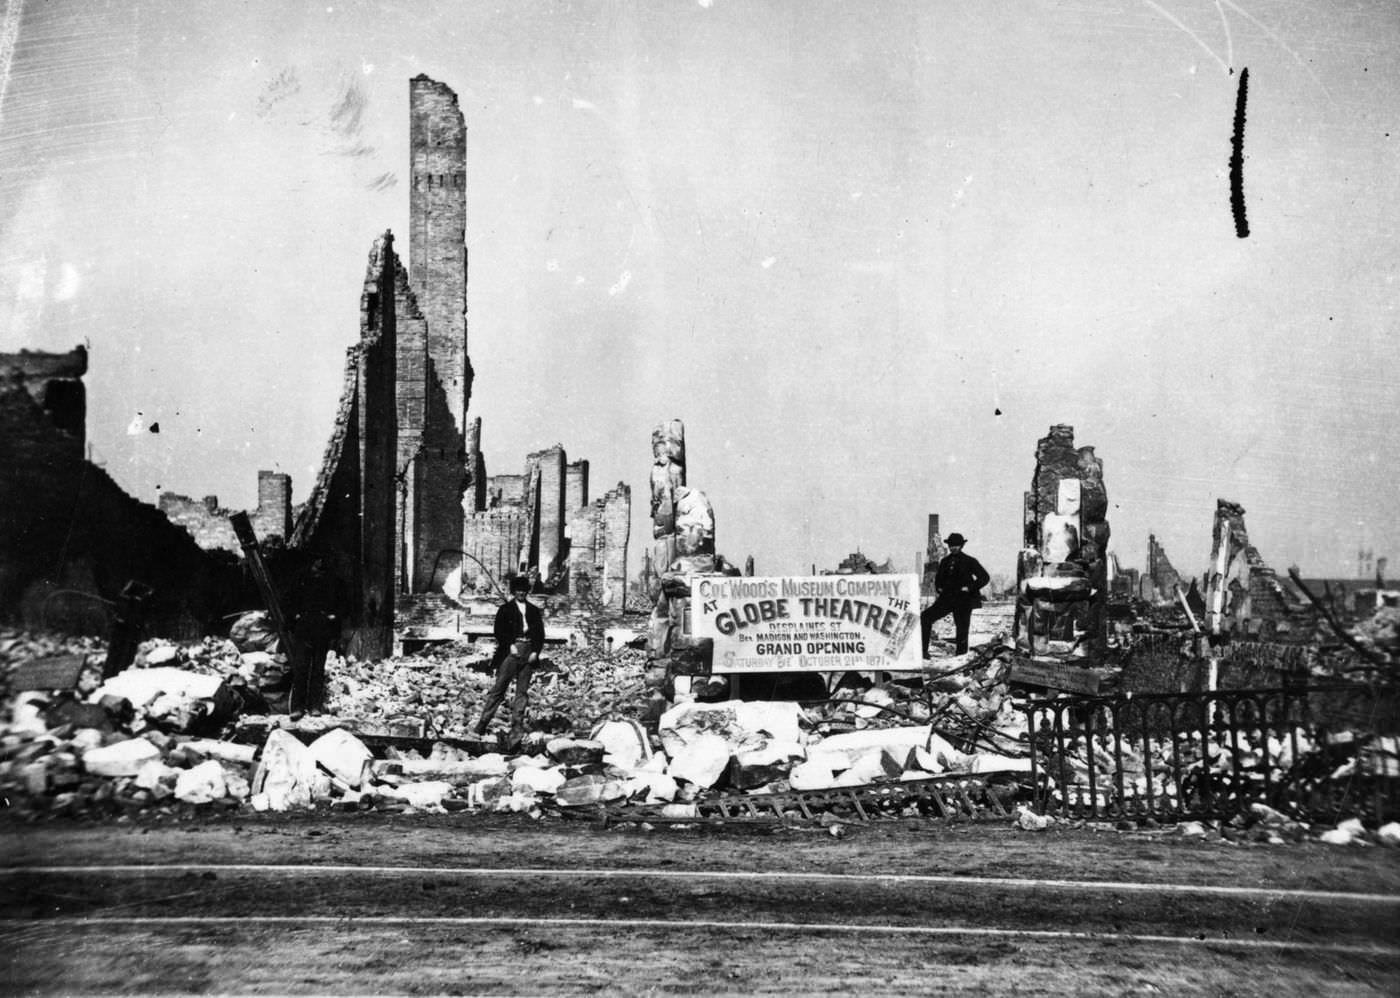 The ruins of Col. Woods museum on Randolph Street, between Clark and Dearborn streets after the Great Chicago Fire in 1871.